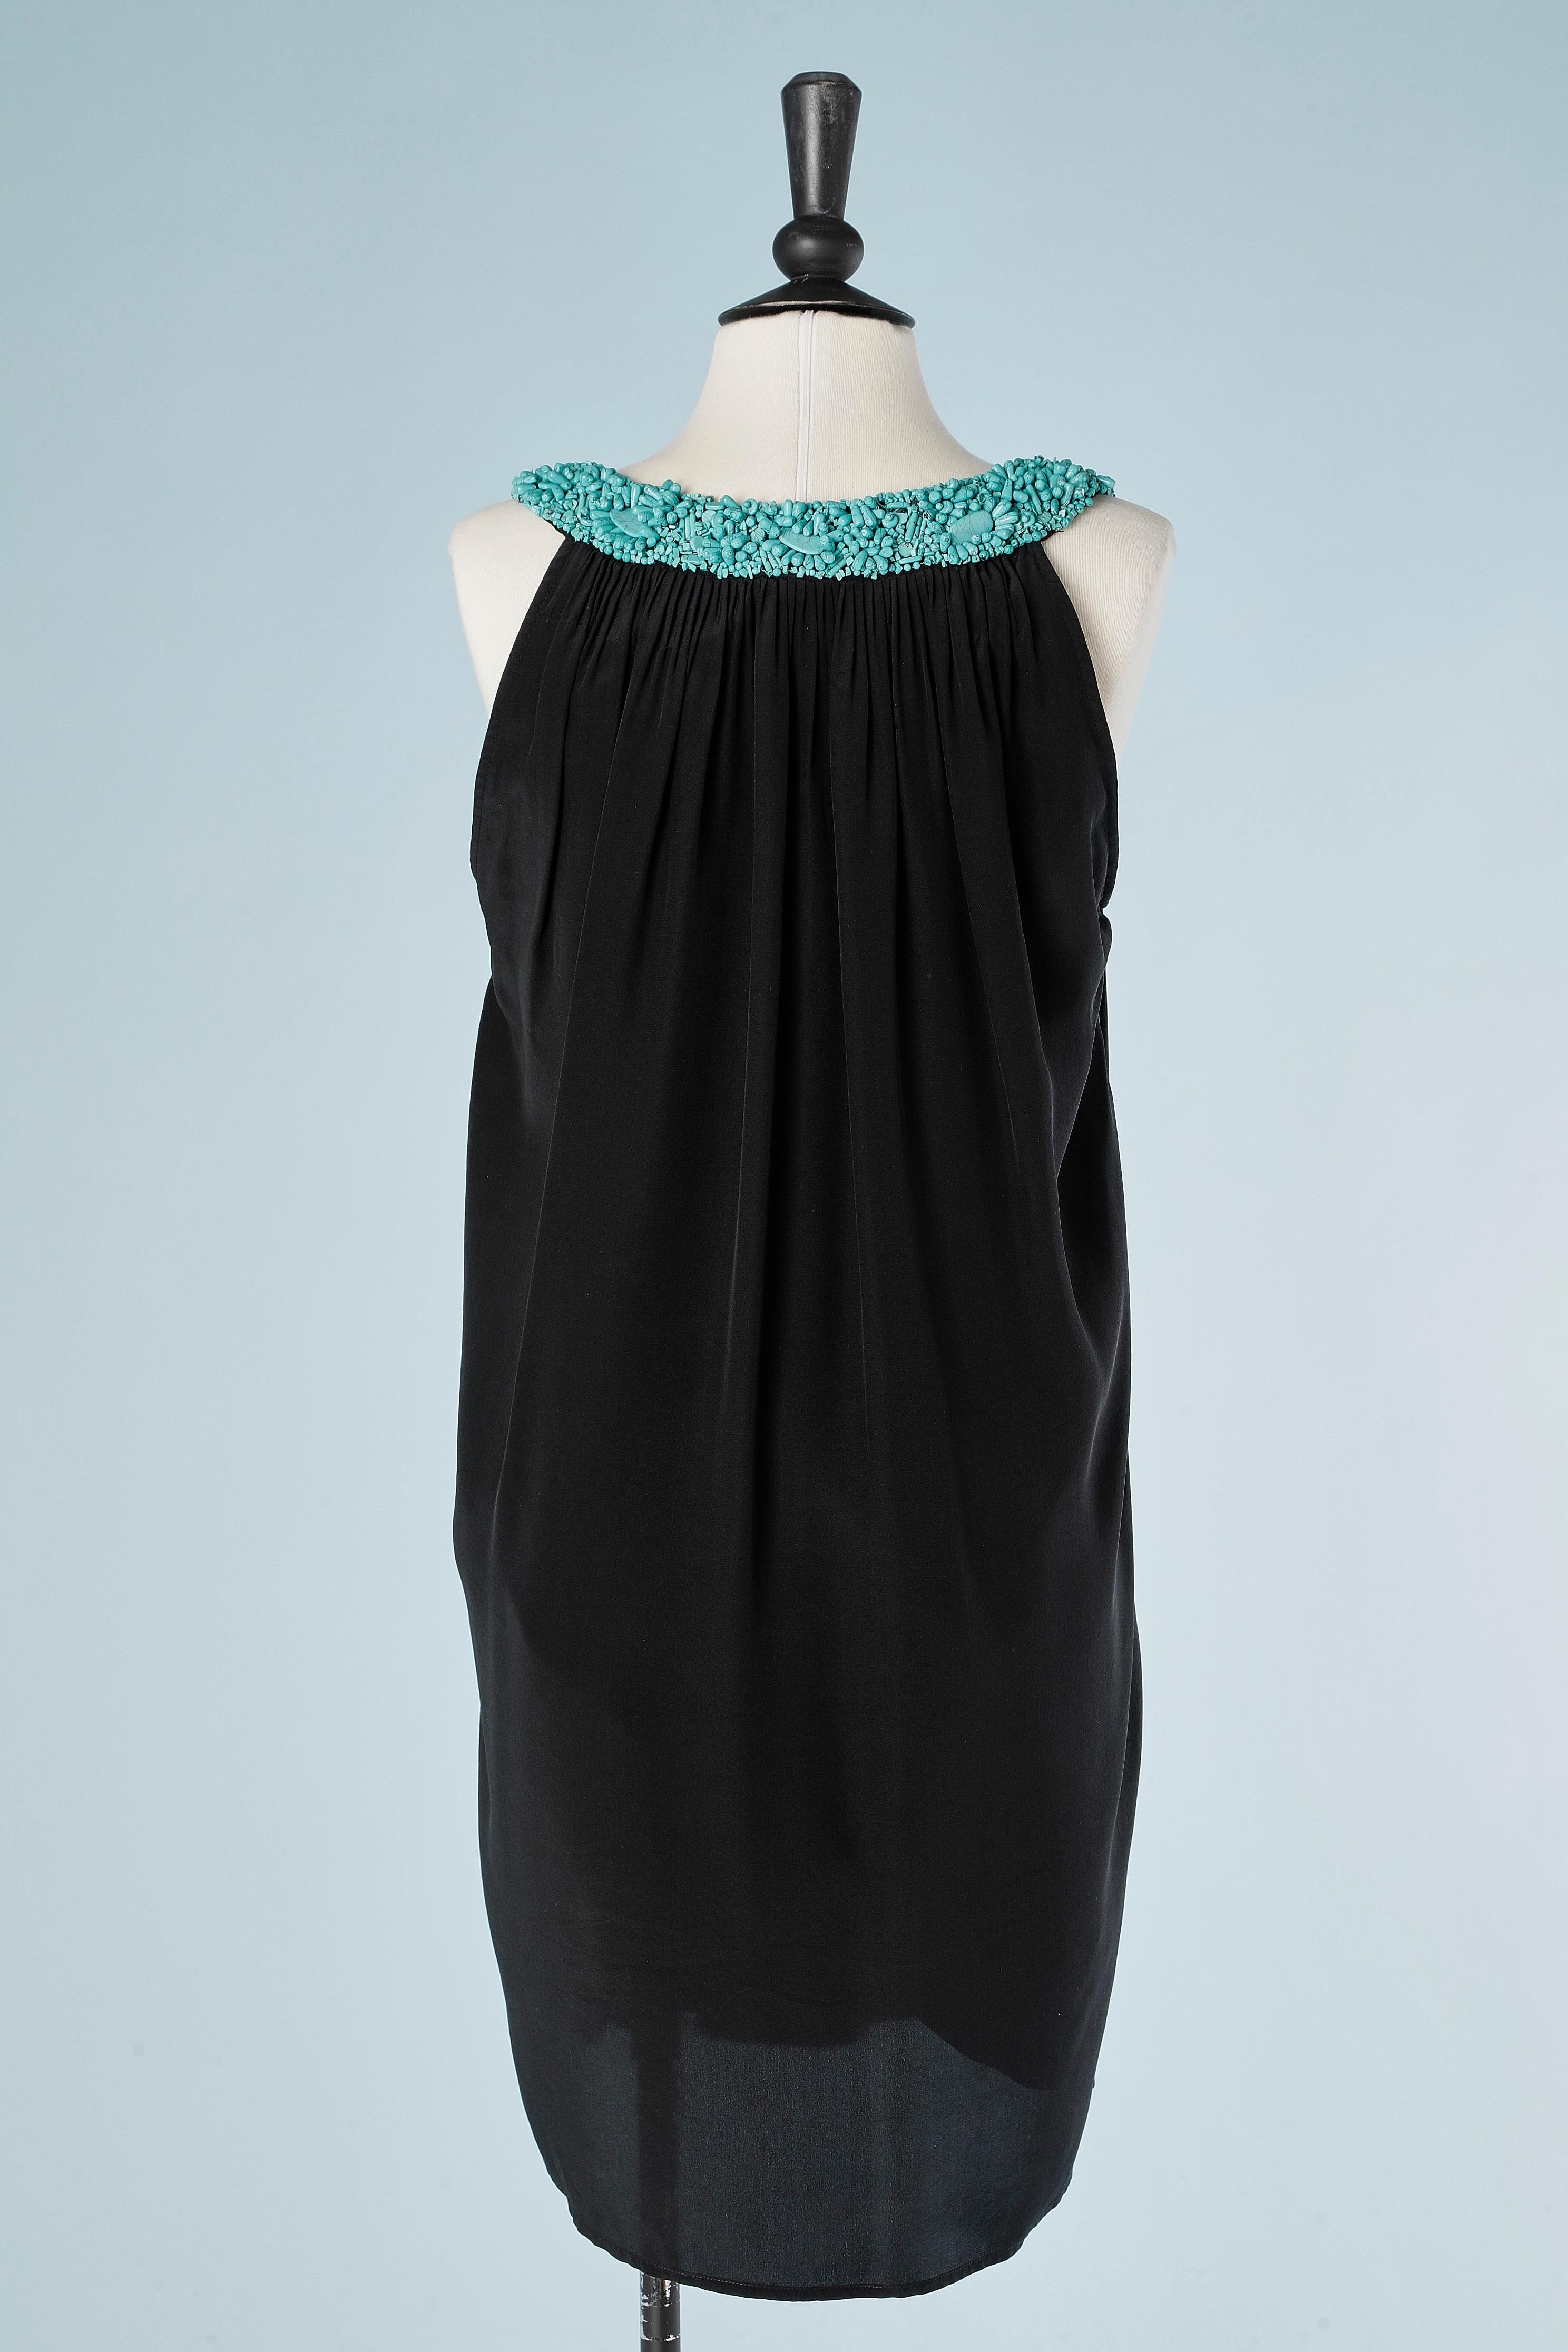 Black cocktail dress with turquoise beaded neckline Moschino Cheap And Chic  For Sale 1